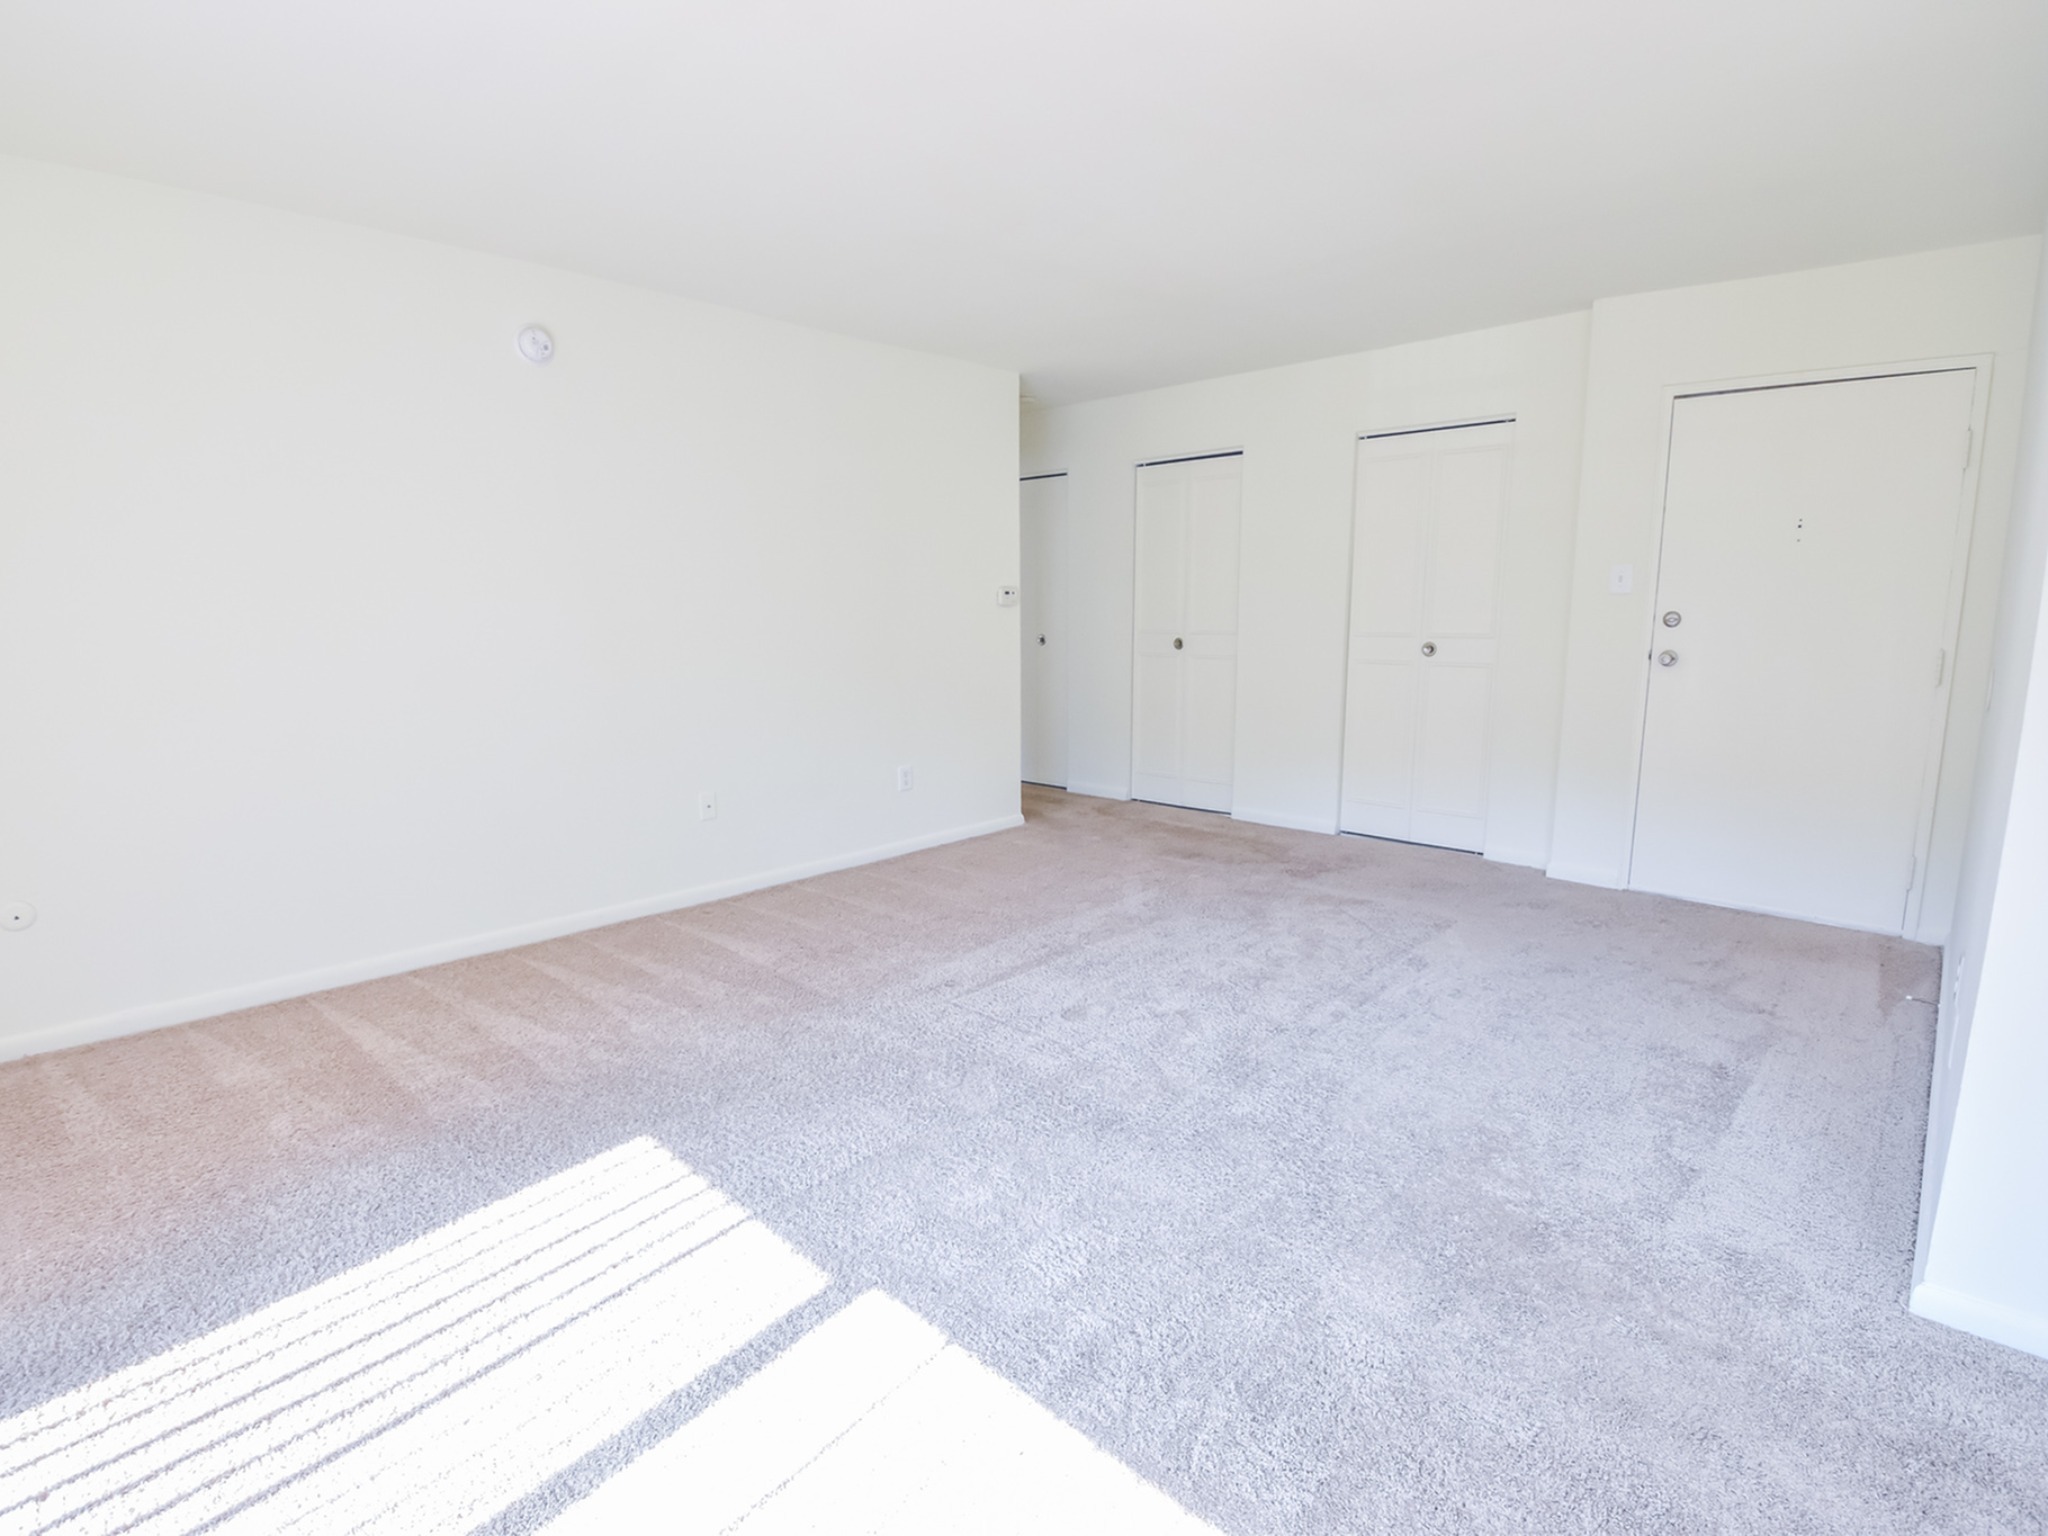 The living room area of an apartment unfurnished, fitted with carpet flooring, and spacious closets